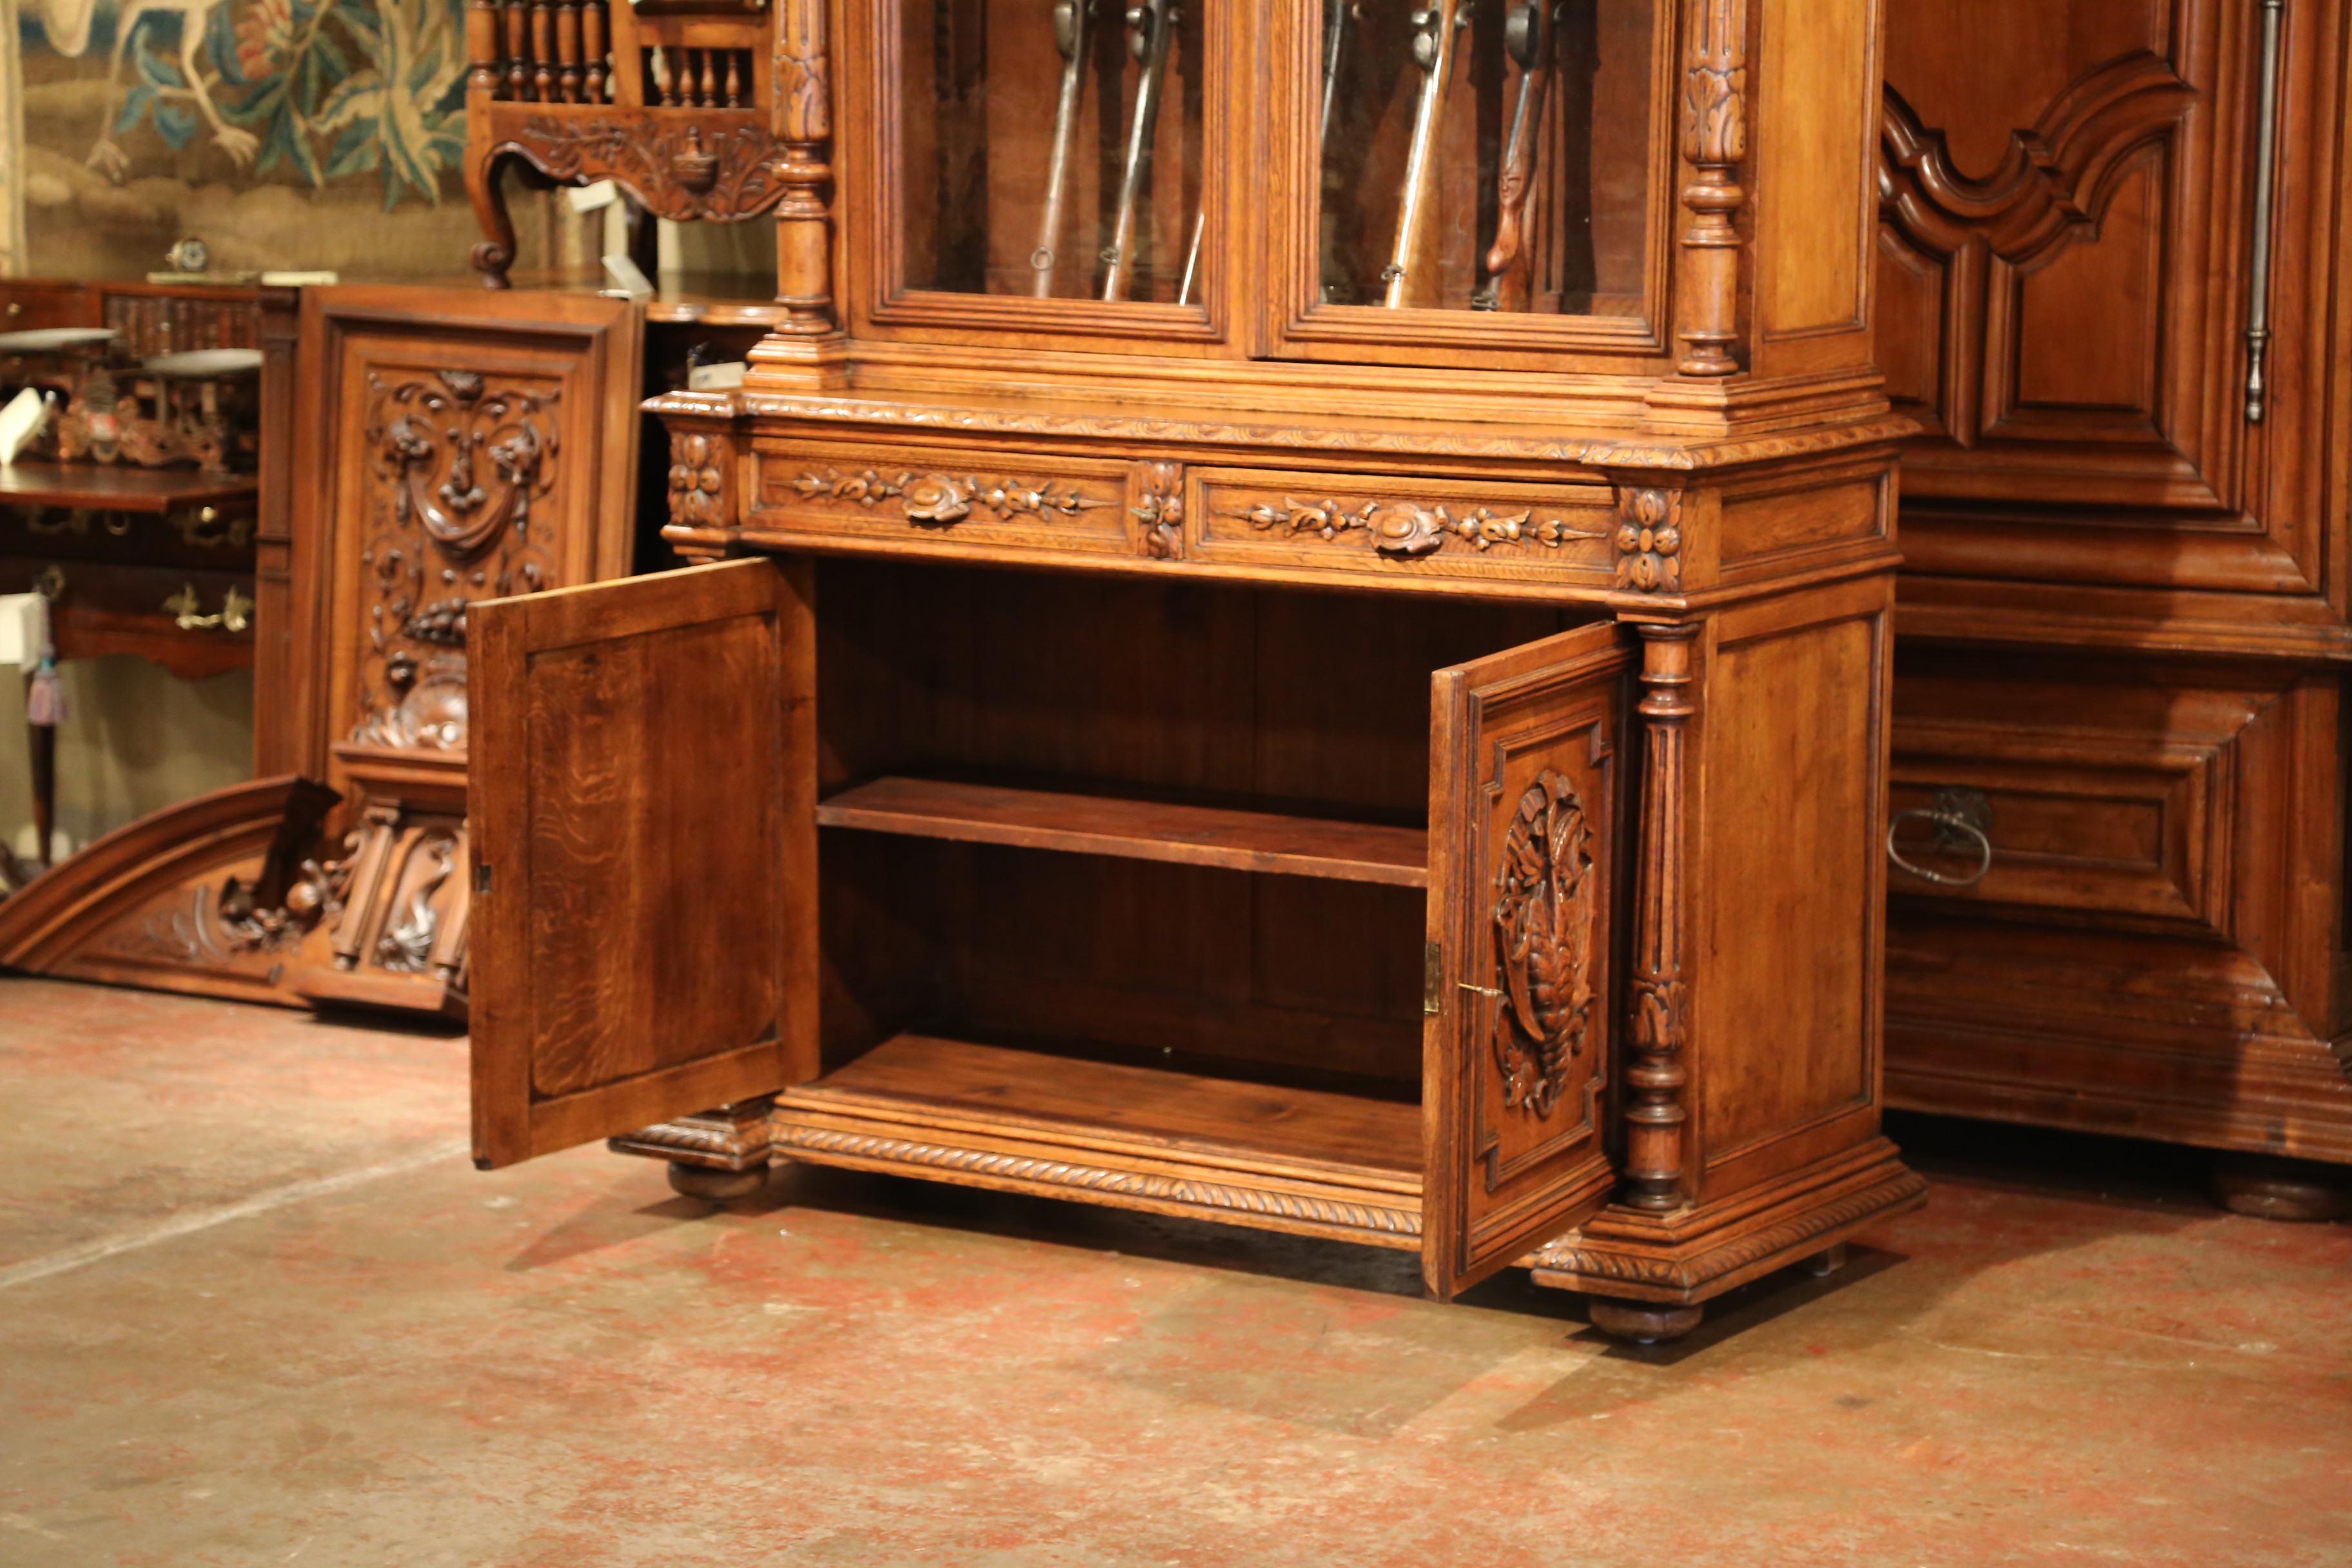 Hand-Carved 19th Century French Carved Oak Nine-Gun Display Buffet Cabinet with Hunt Motifs